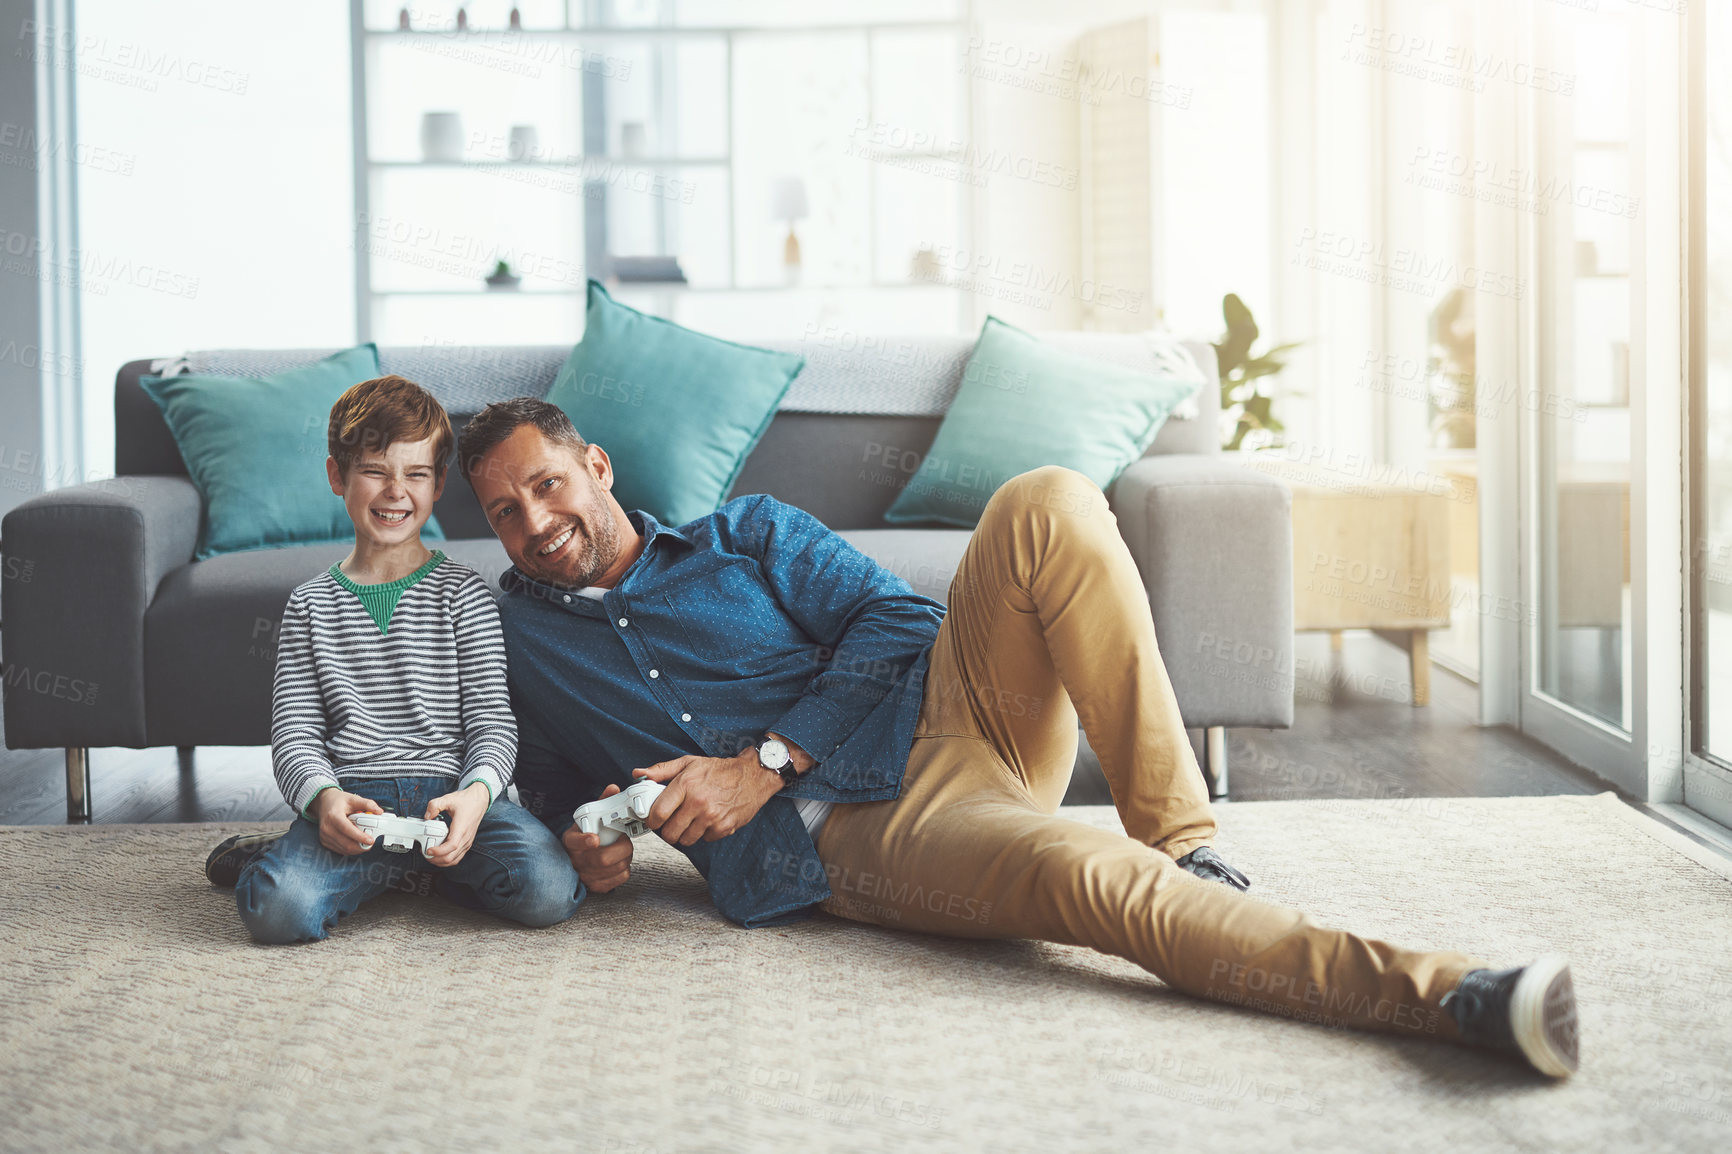 Buy stock photo Happy father, portrait and playing games with child for entertainment or bonding on floor at home. Dad, son or kid with smile and enjoying esports or fun on console together with controller at house